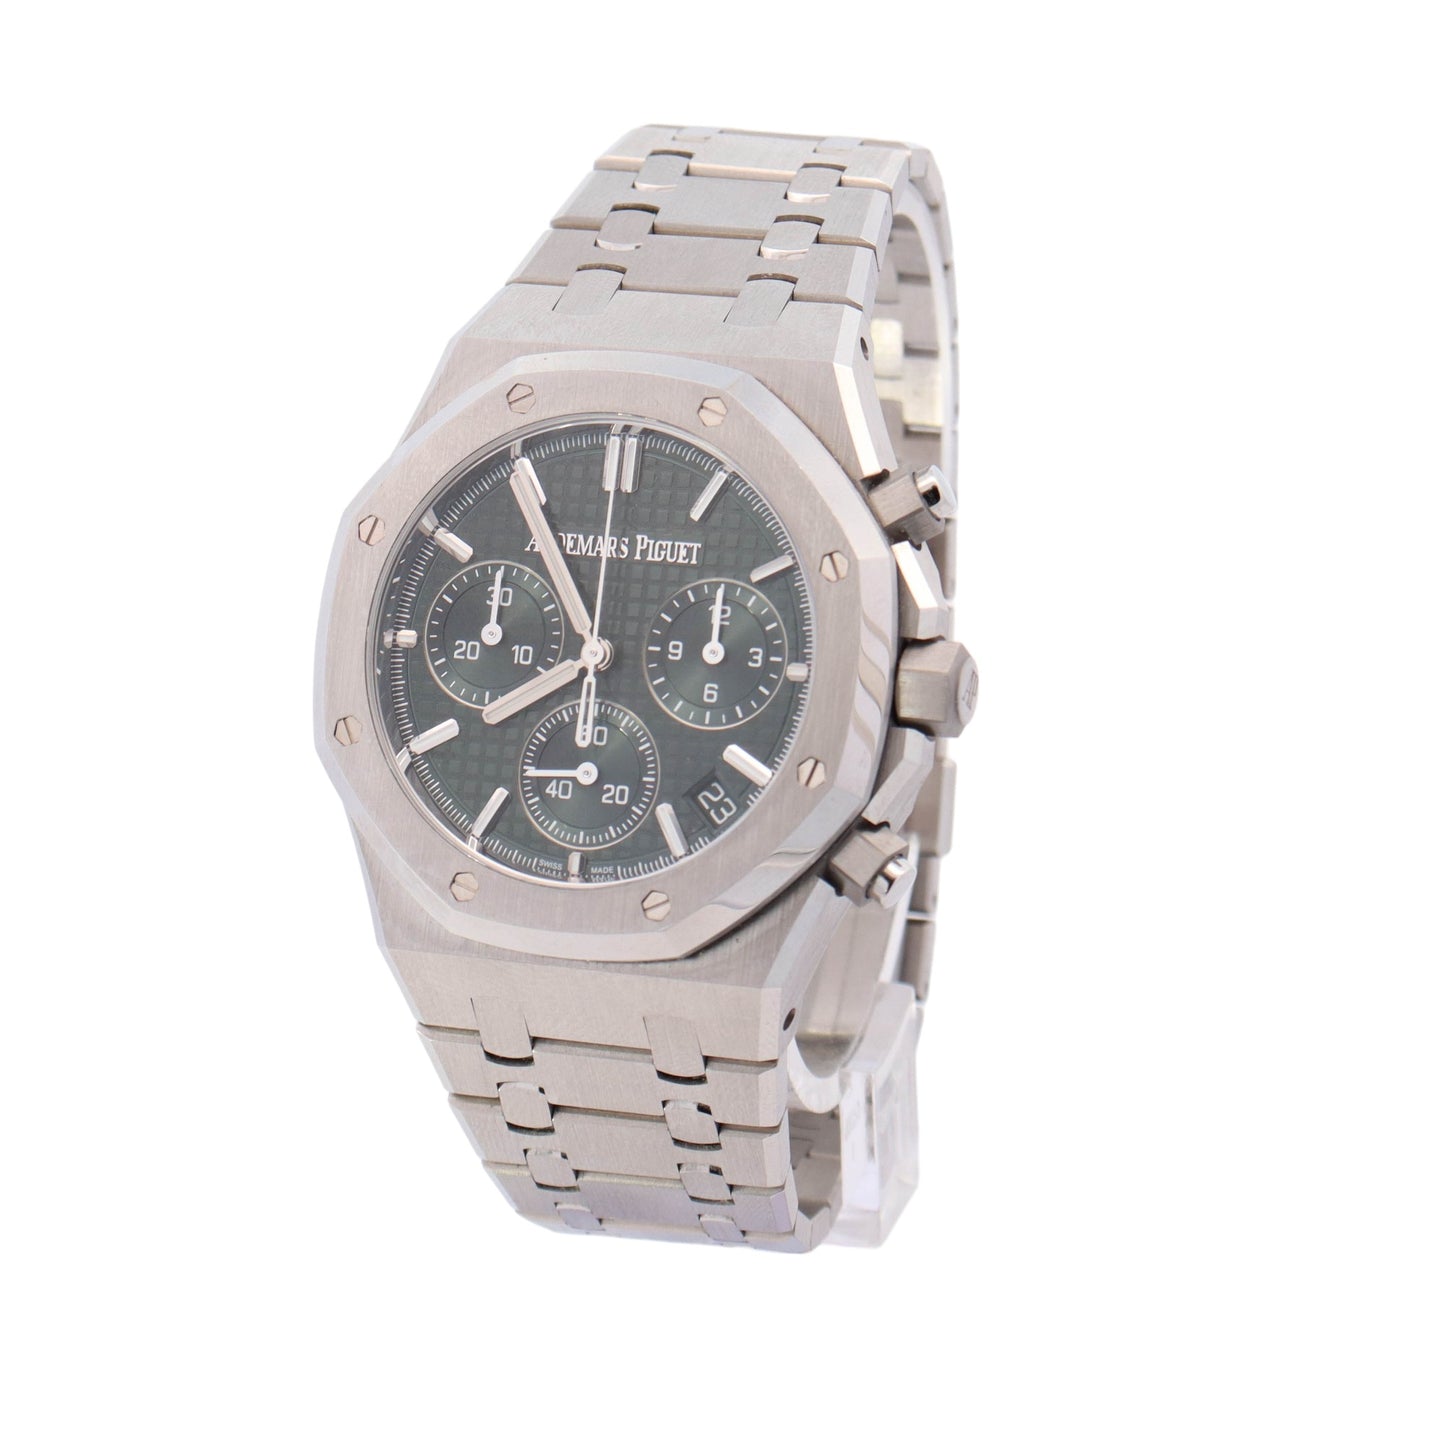 Audemars Piguet Royal Oak 41mm Stainless Steel Green Chronograph Dial Watch  Reference #:  26240ST.OO.1320ST.08 - Happy Jewelers Fine Jewelry Lifetime Warranty